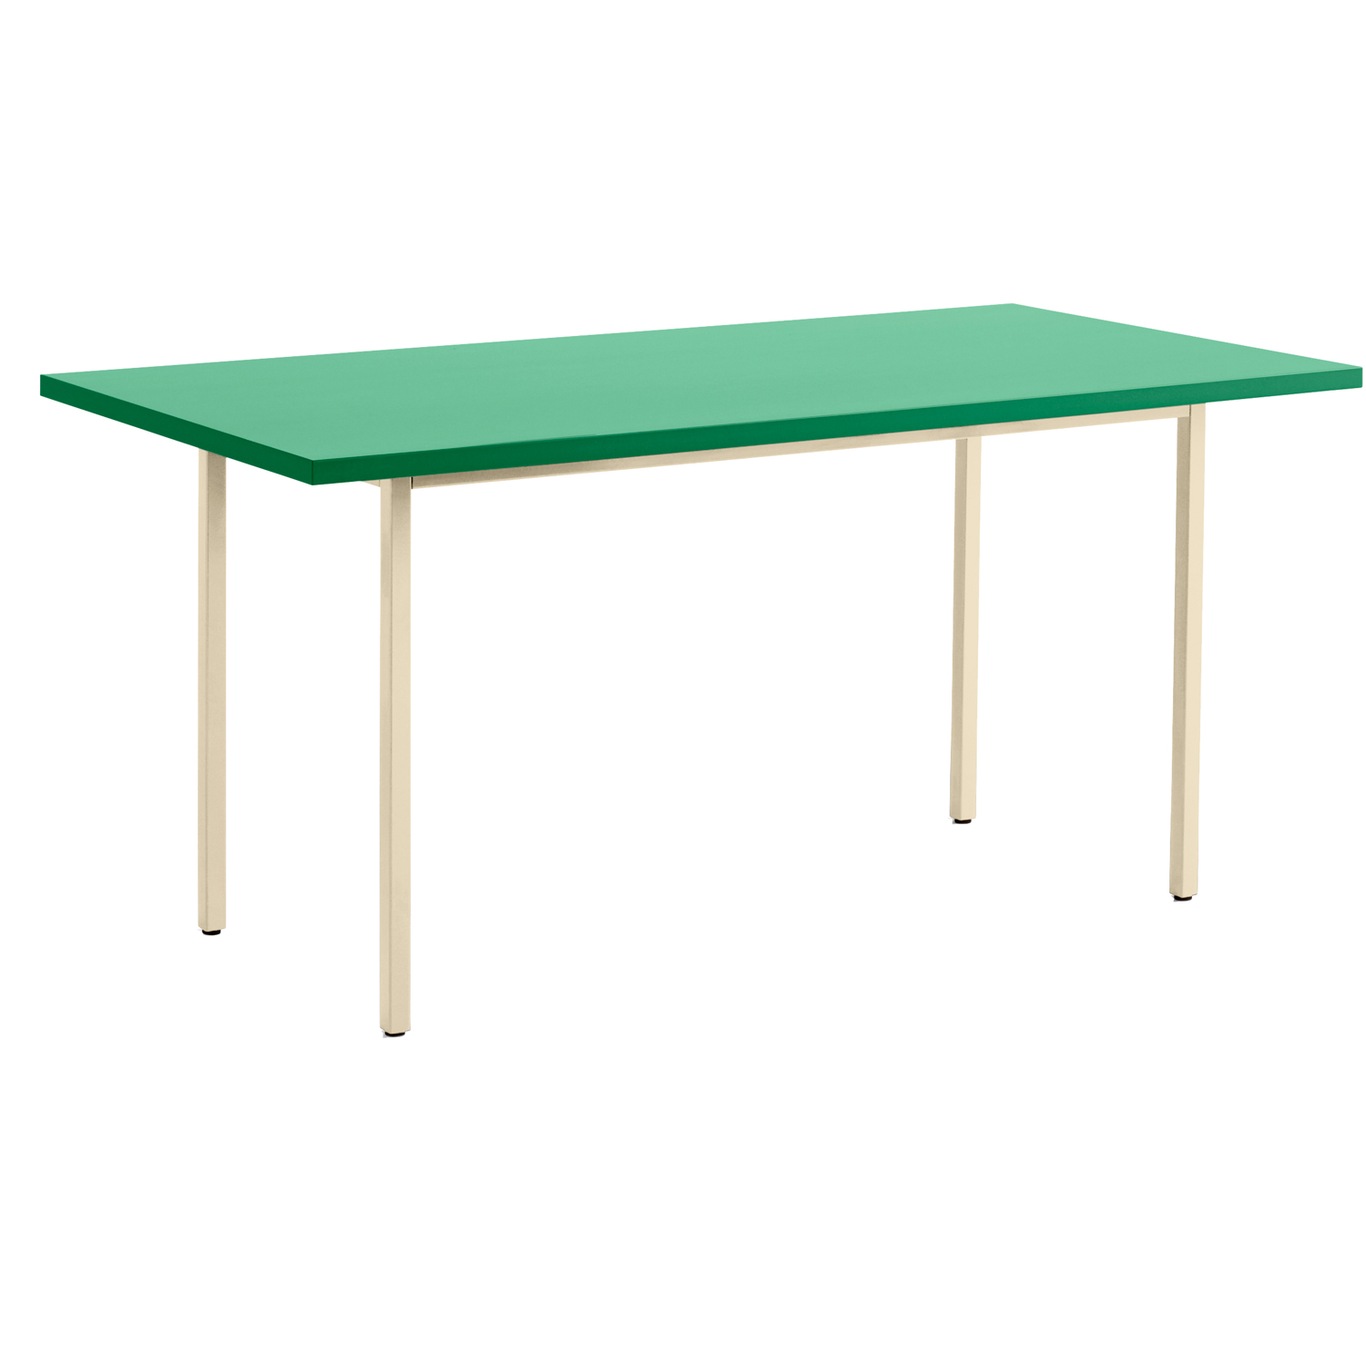 Two-Colour Bord, Ivory 160x82 cm, Ivory / Green Mint